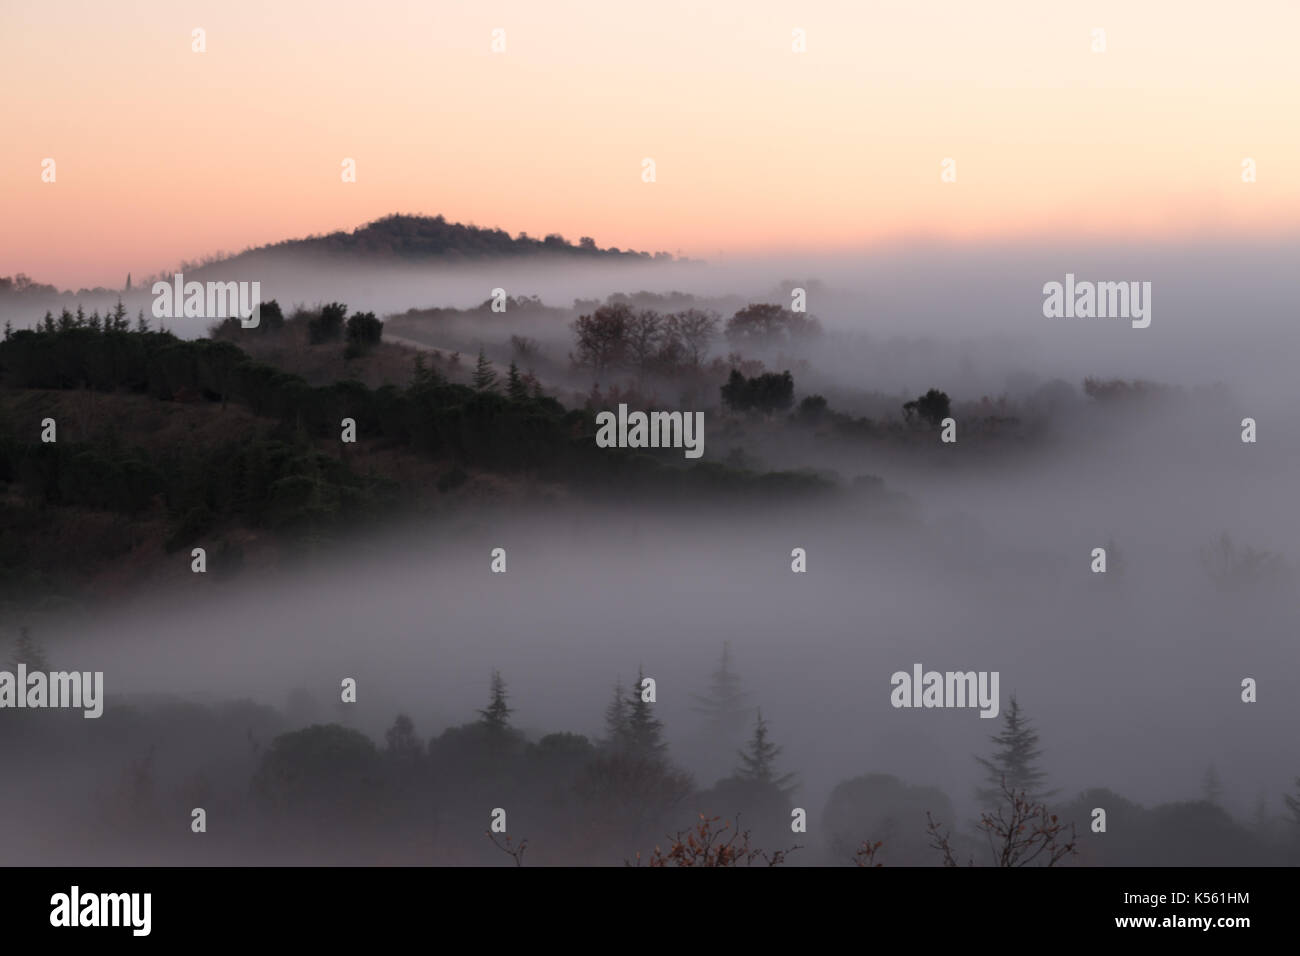 Hills and trees in the midst of fog at sunset Stock Photo